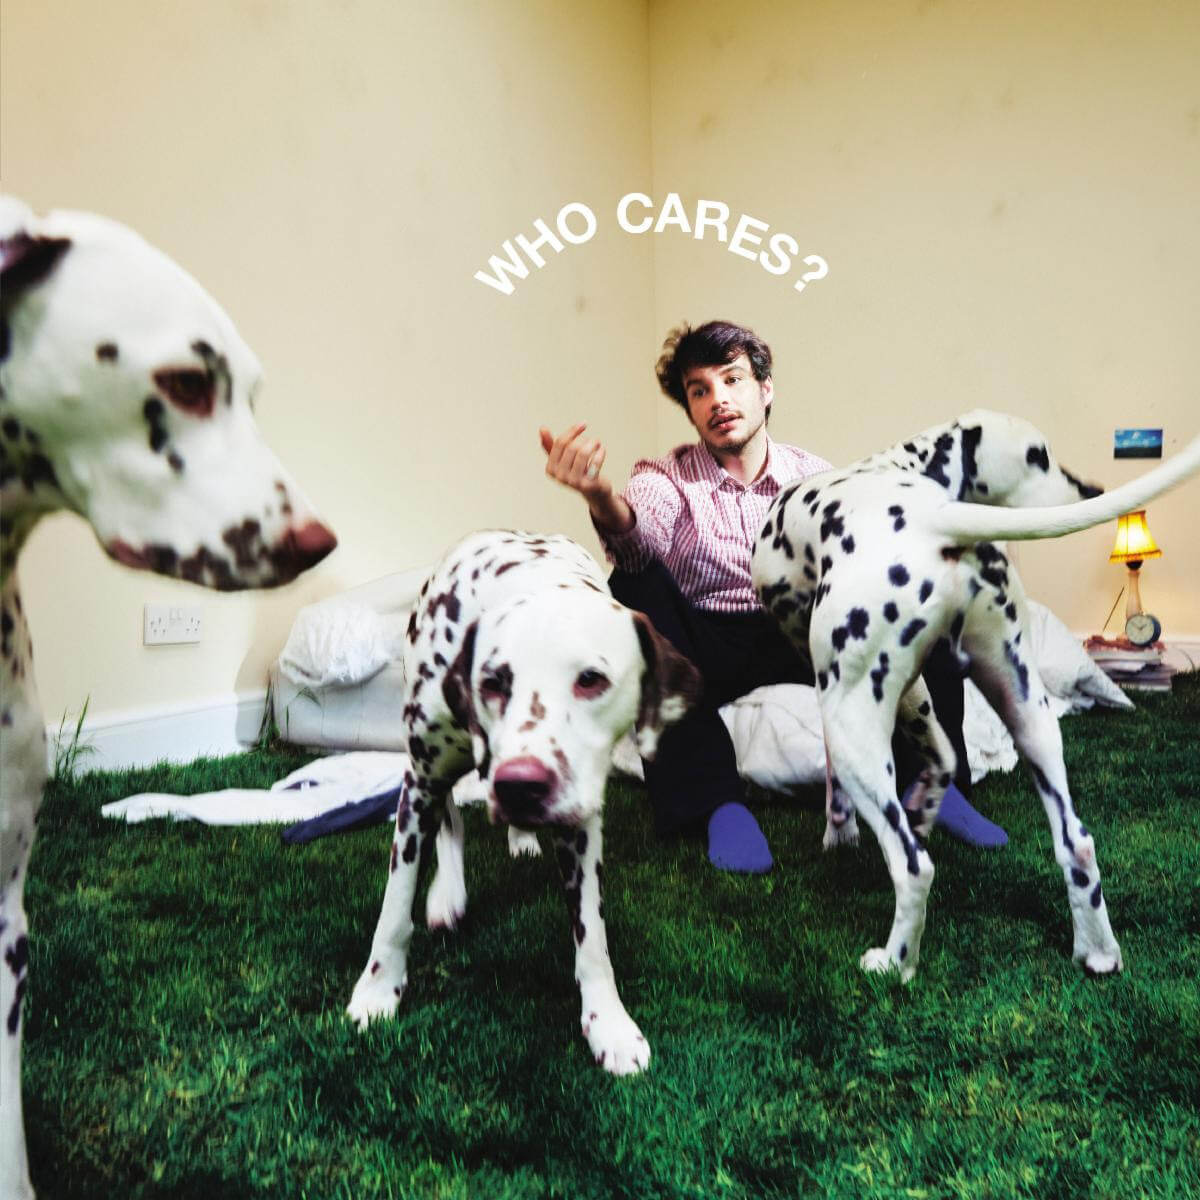 Rex Orange County will release his new album WHO CARES?, on March 11th via Sony Music. Today, he has shared, the album track "Keep It Up